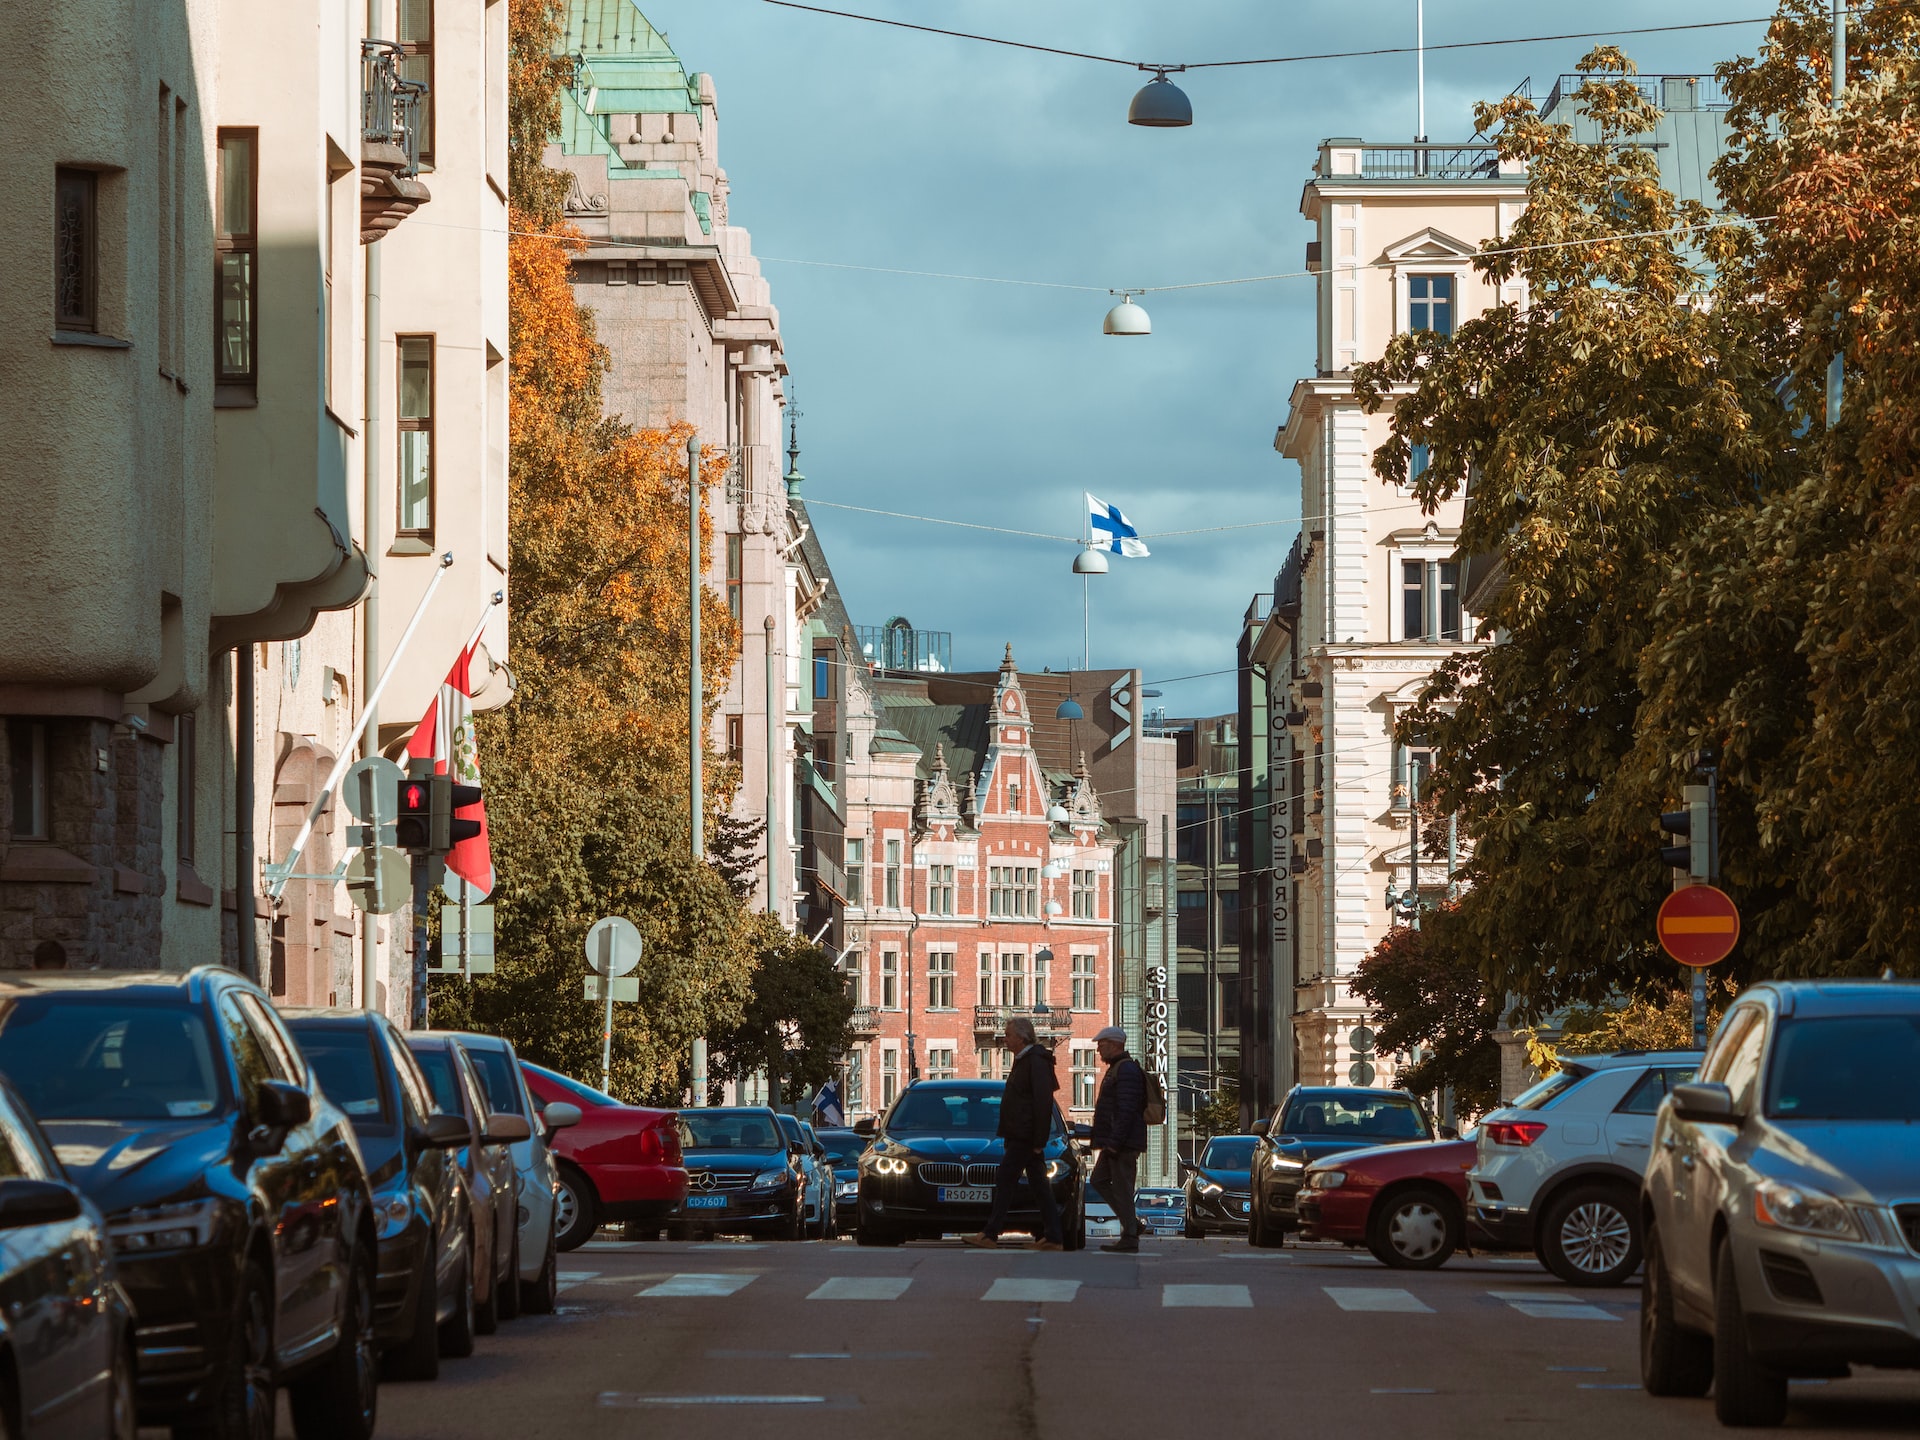 housing in Finland continues to rise in price